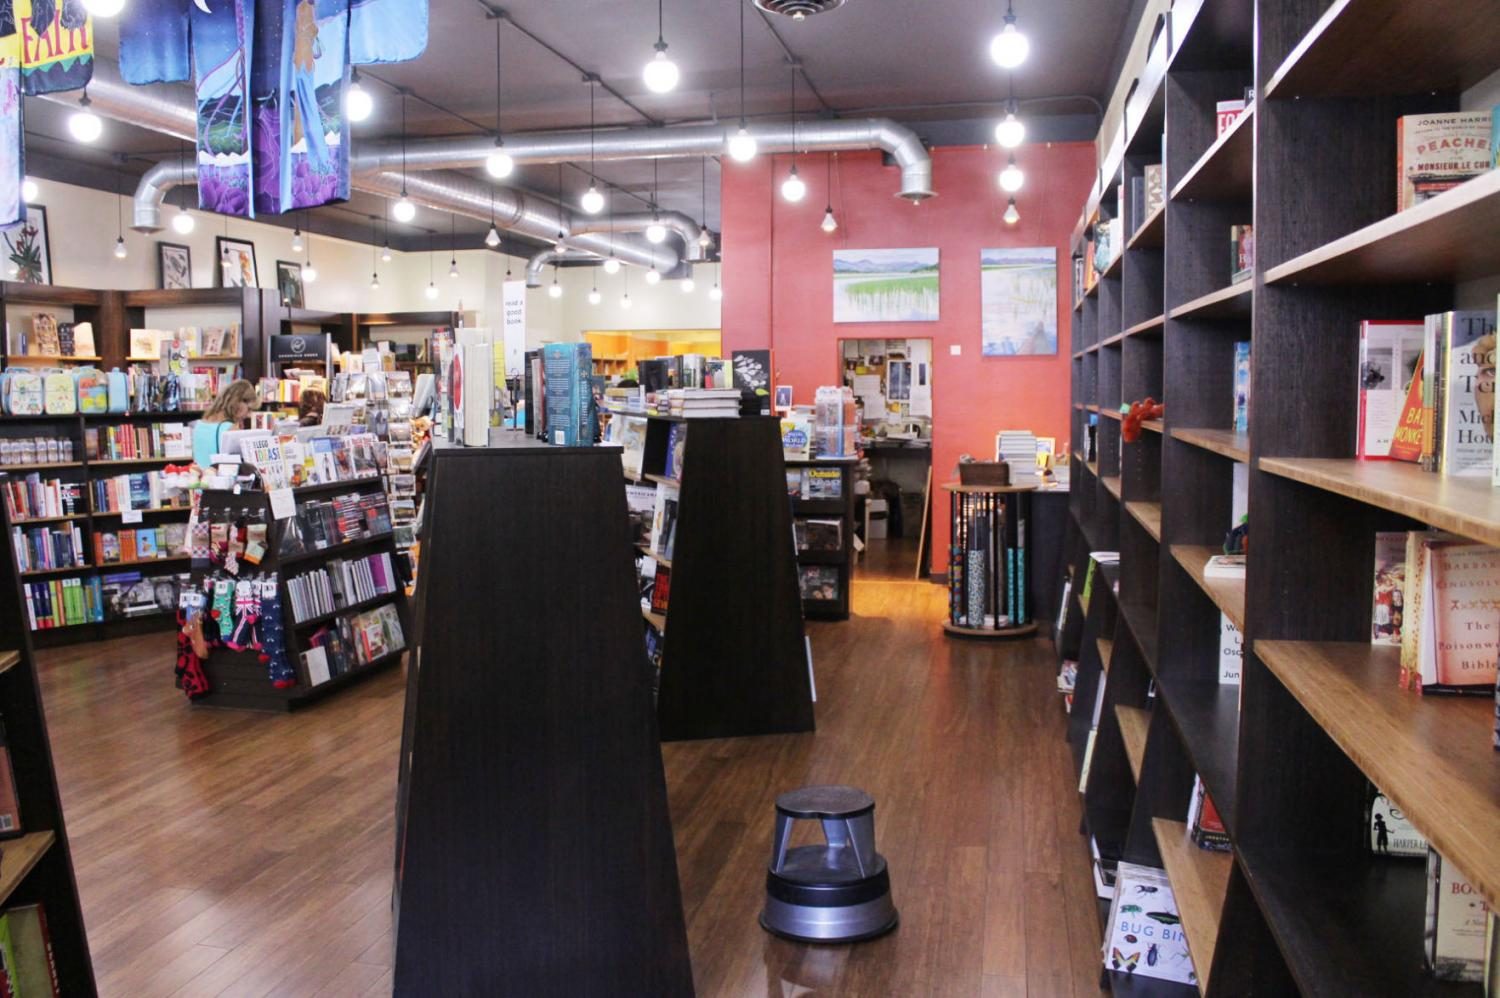 The interior of The Book People of Moscow store as seen on Sept. 16, 2014.